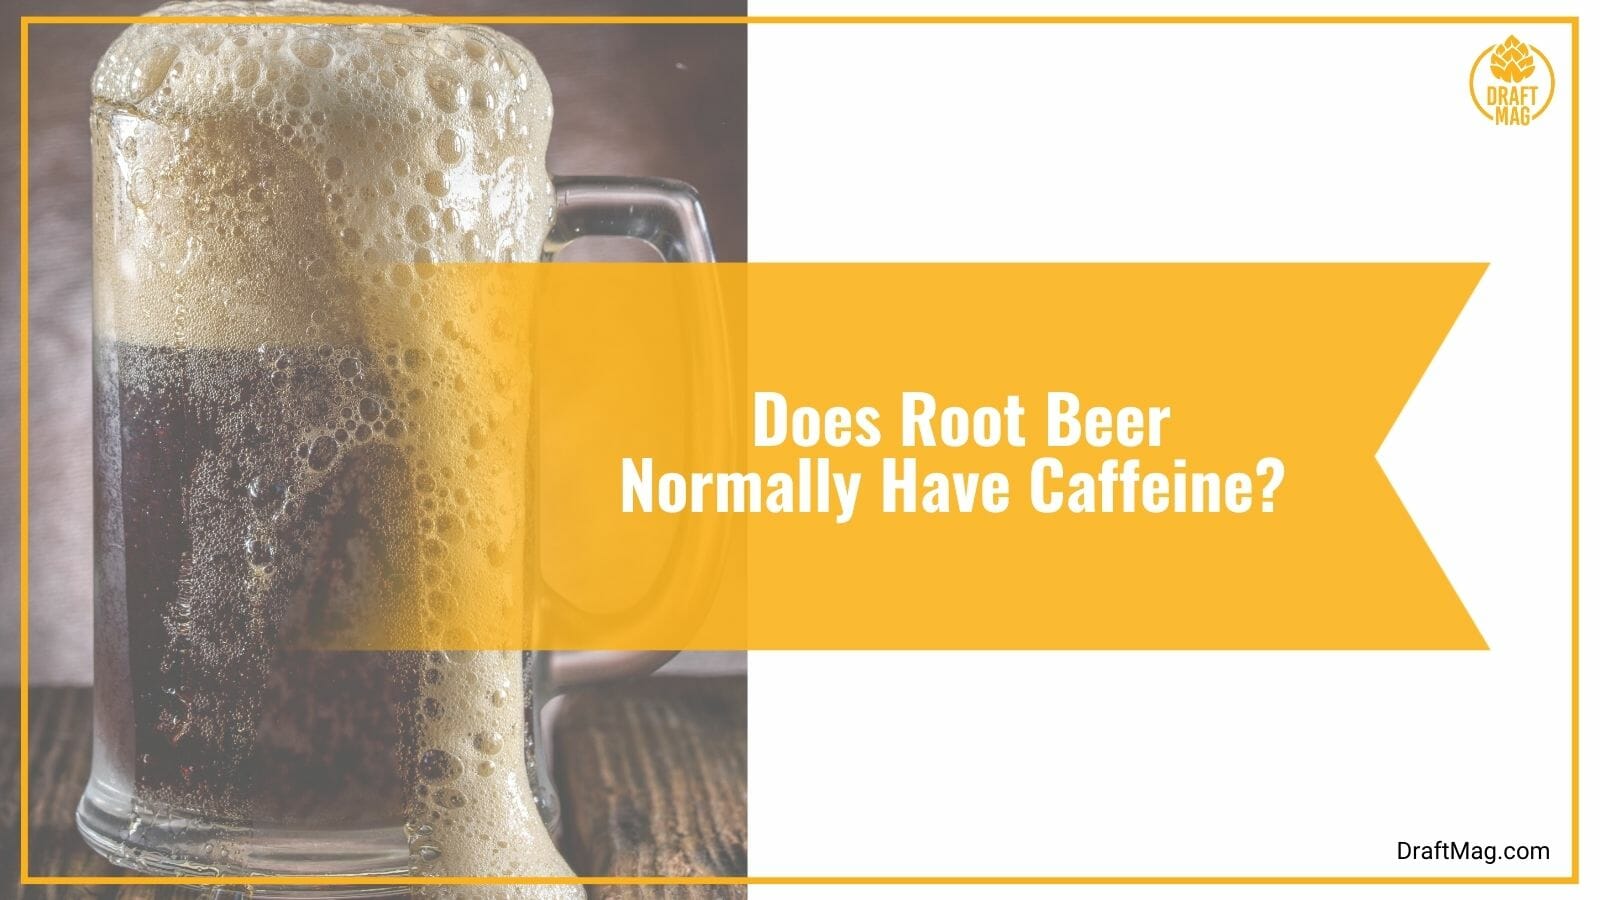 Does Root Beer Normally Have Caffeine